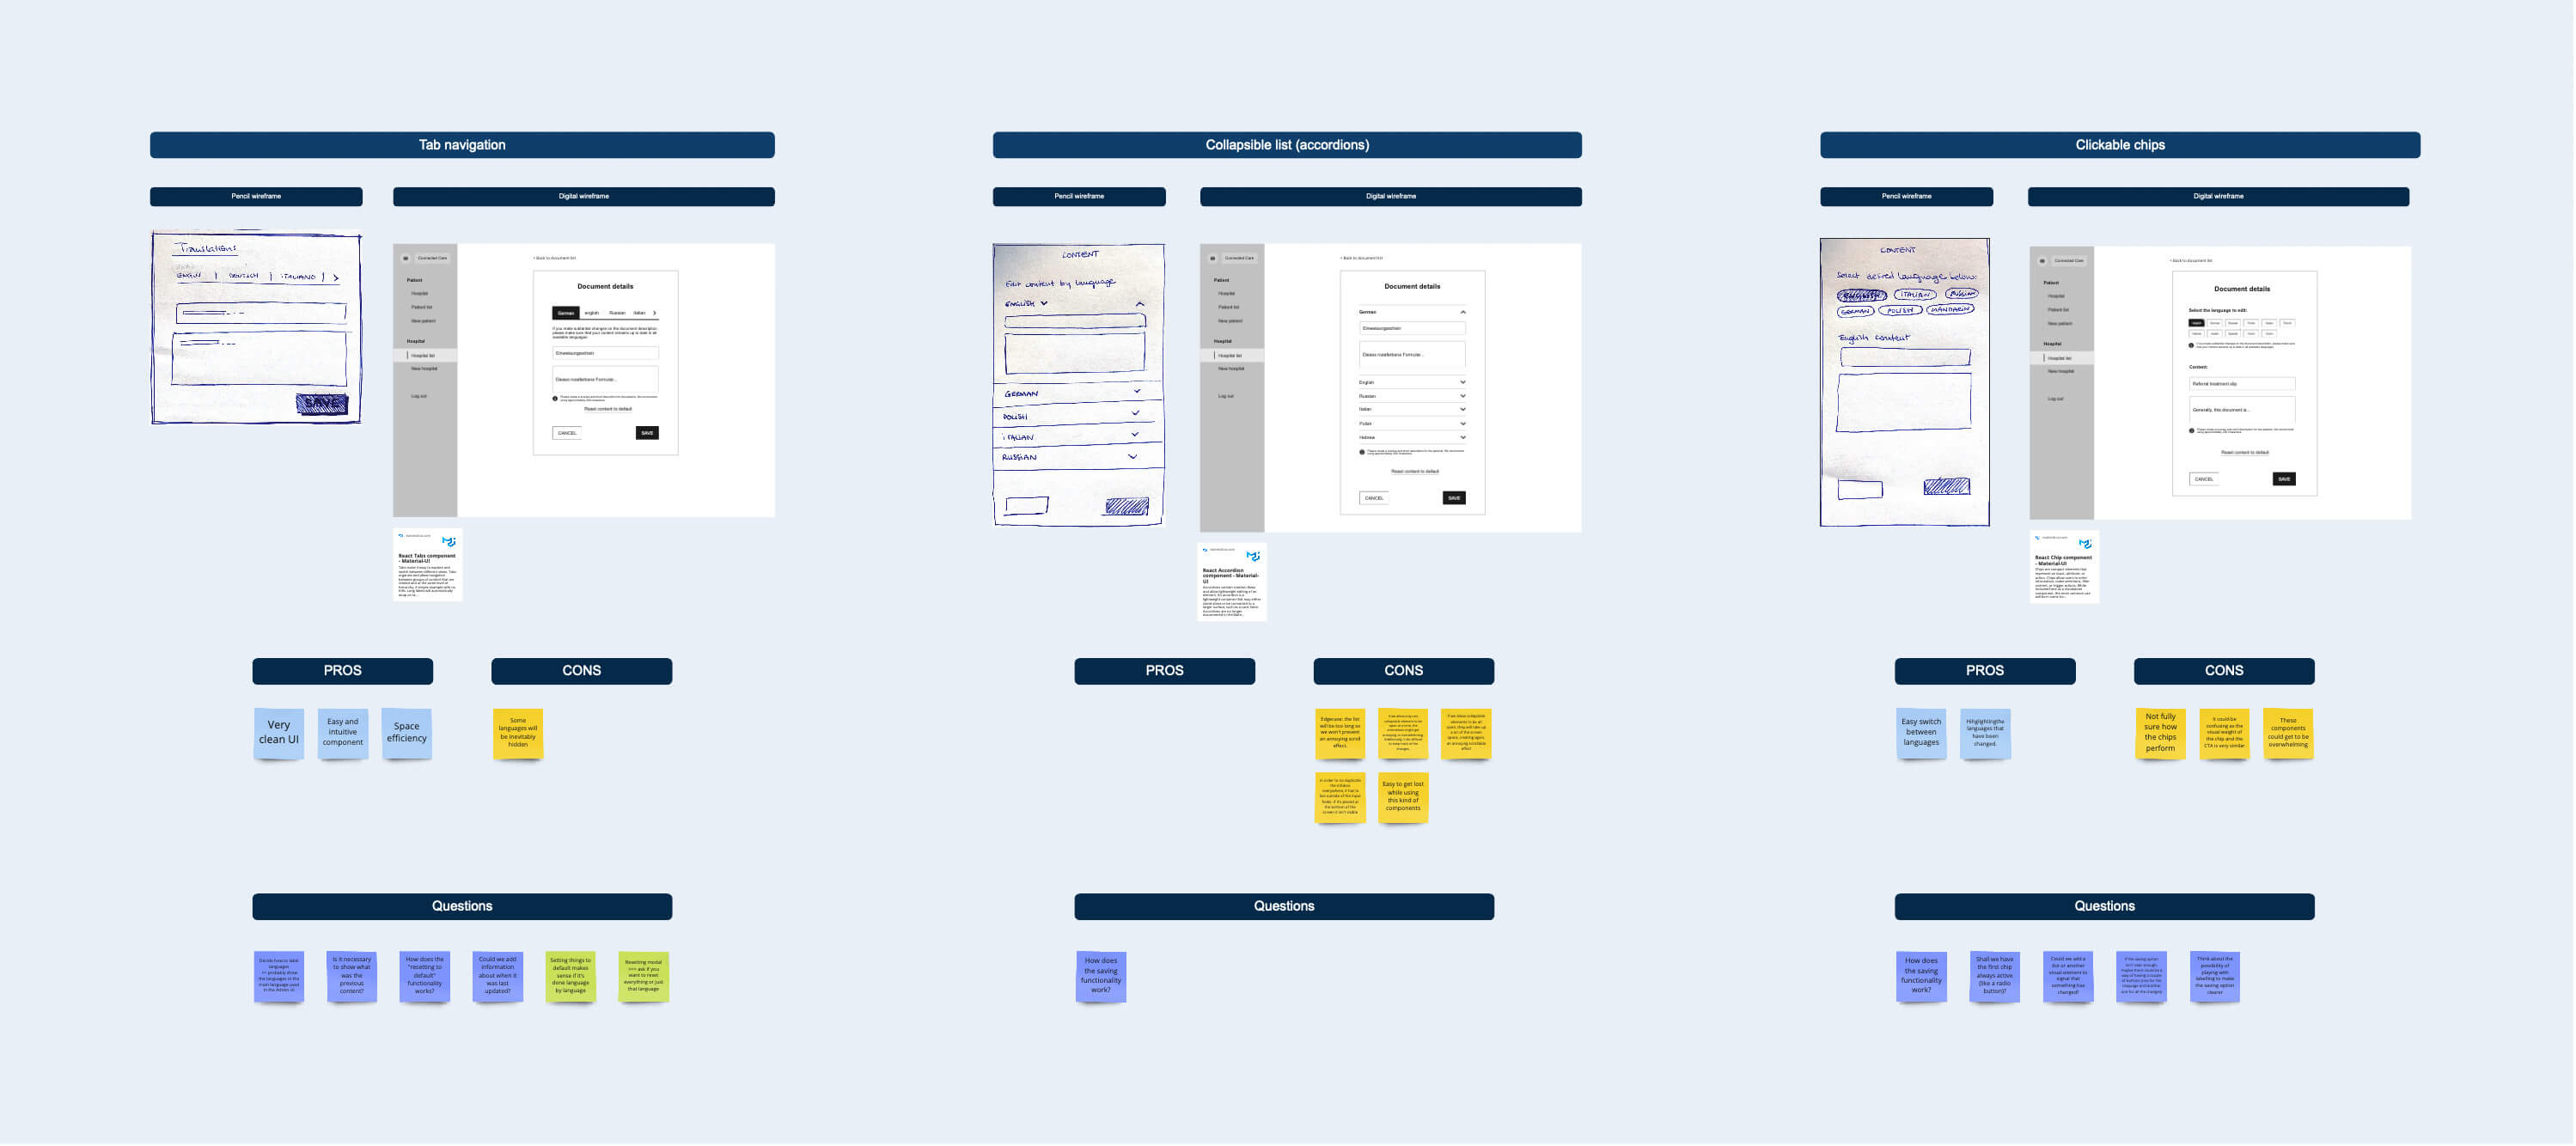 A view on the workshop held to discuss component possibilities based on a few wireframes